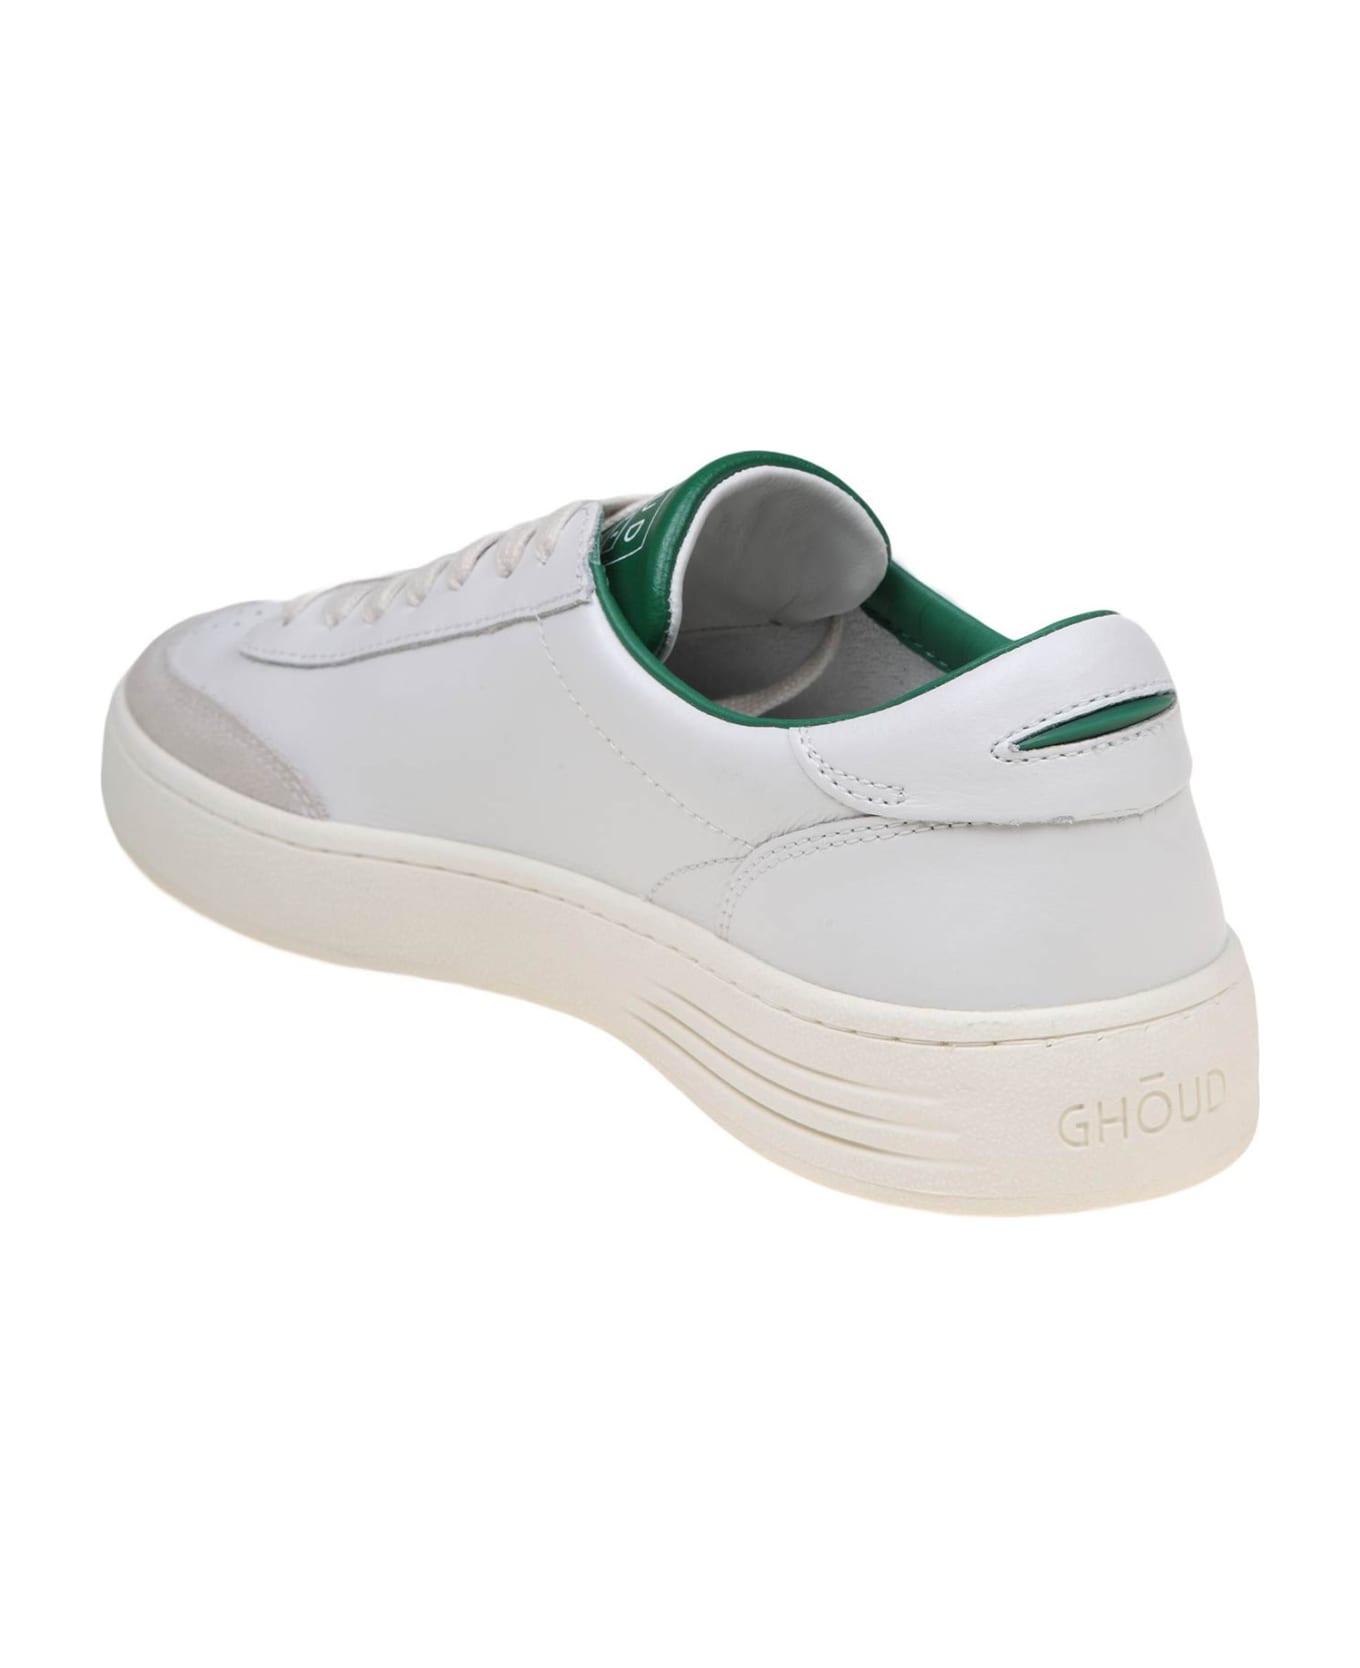 GHOUD Lido Low Sneakers In White/green Leather And Suede - leat/suede wht/grn スニーカー